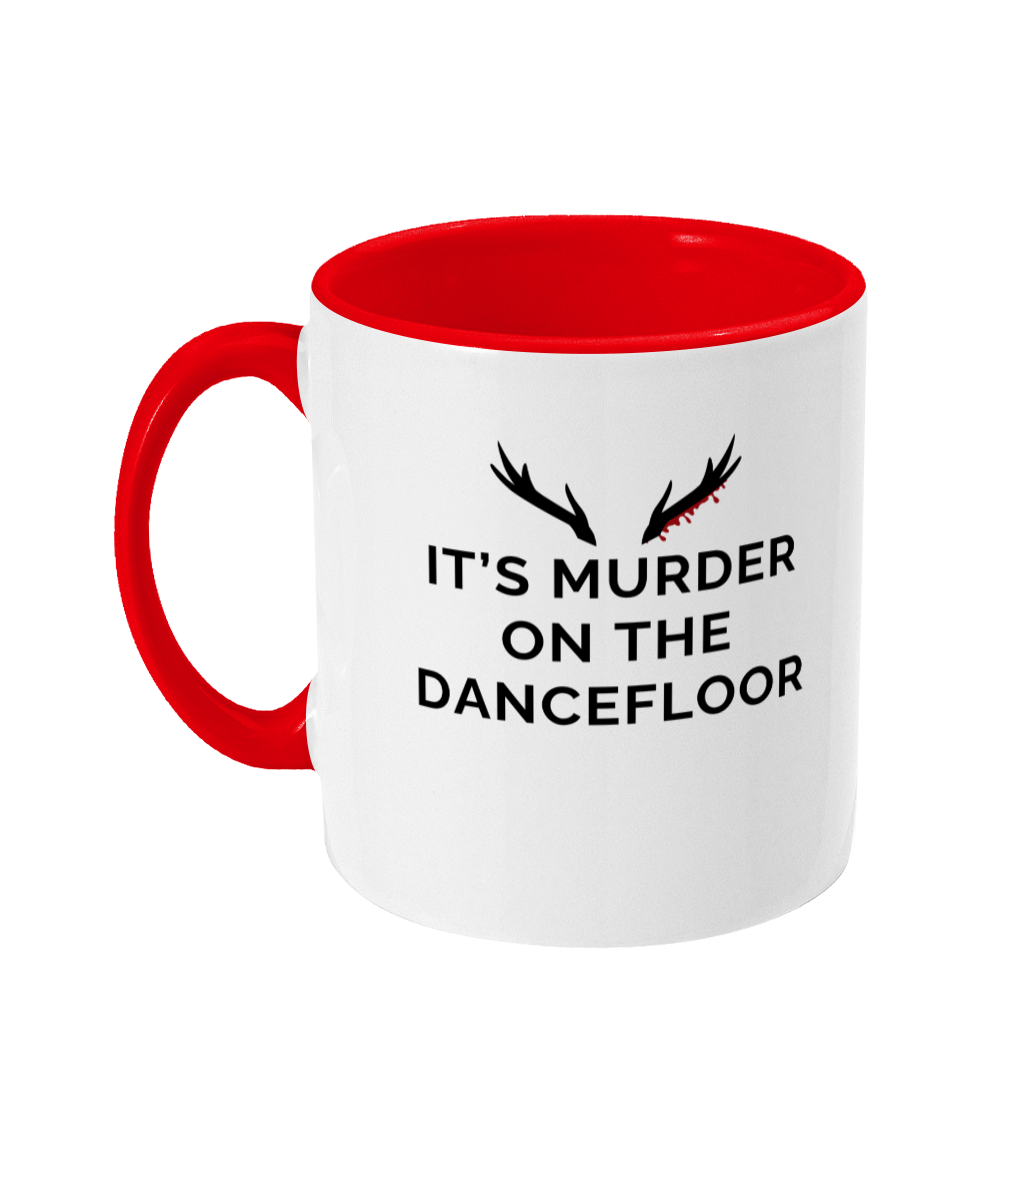 Mug with a red handle and red inner that reads "It's Murder On The Dancefloor" with antlers above the text with blood drips coming from the right bottom antler